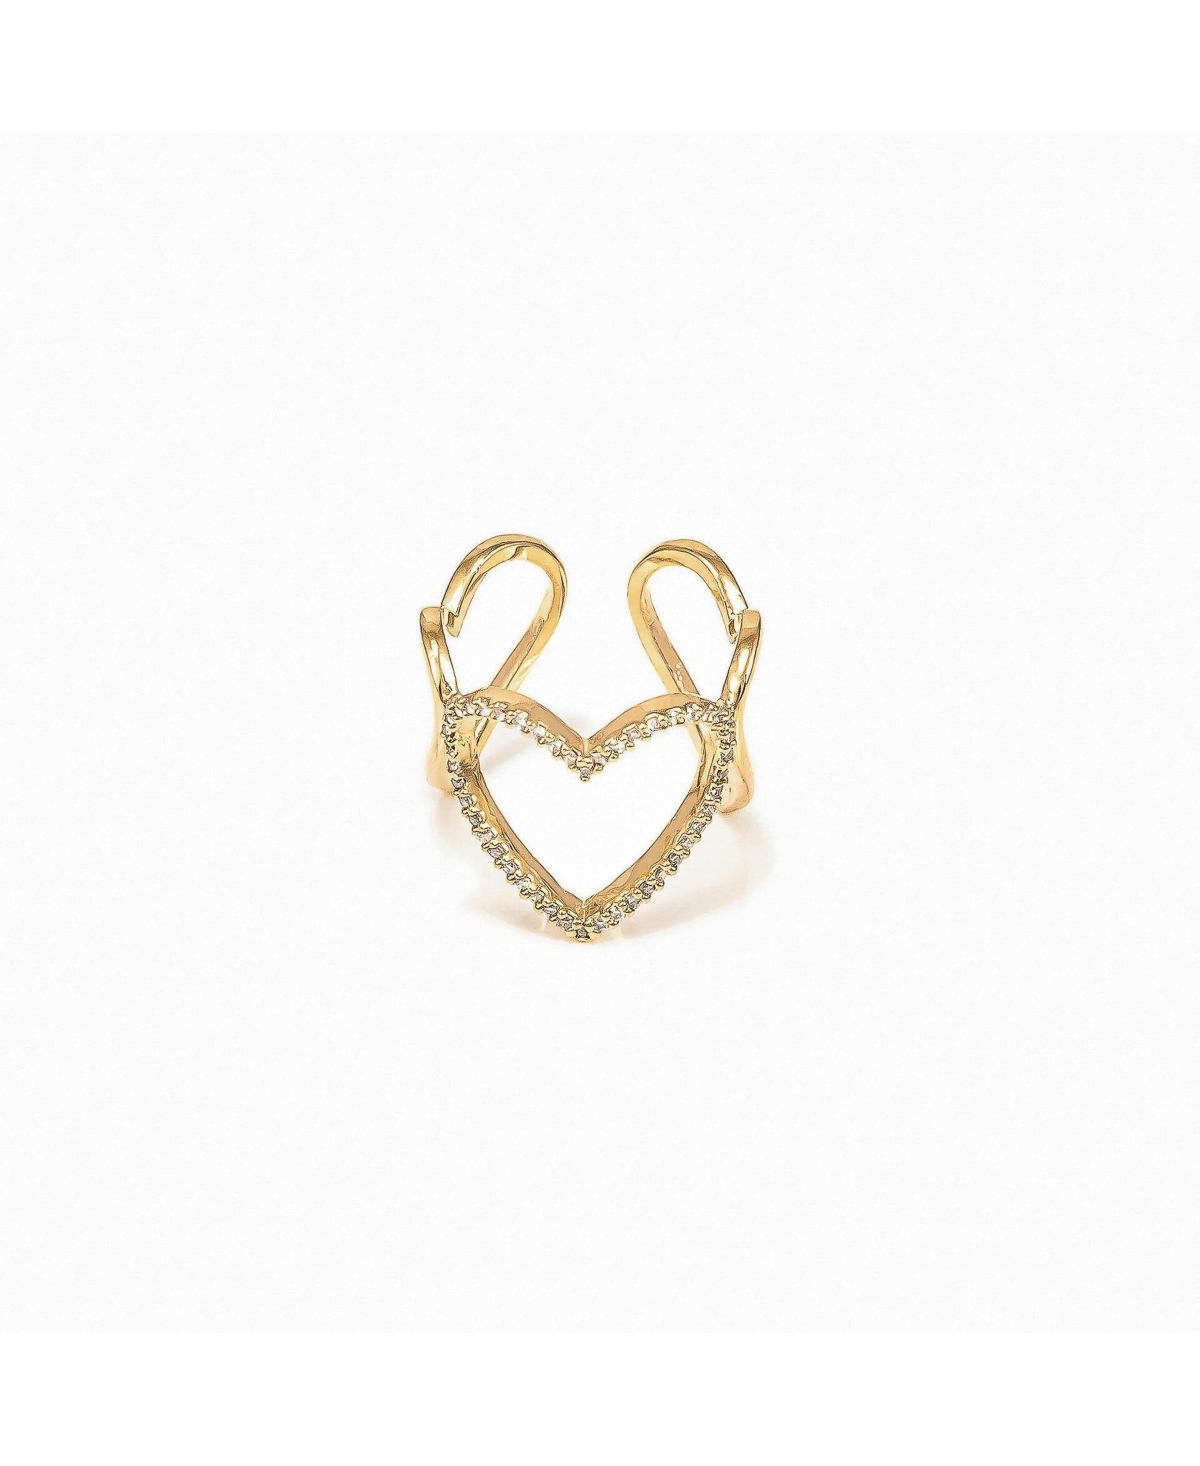 Mae Triple Heart Statement Adjustable Ring - Gold